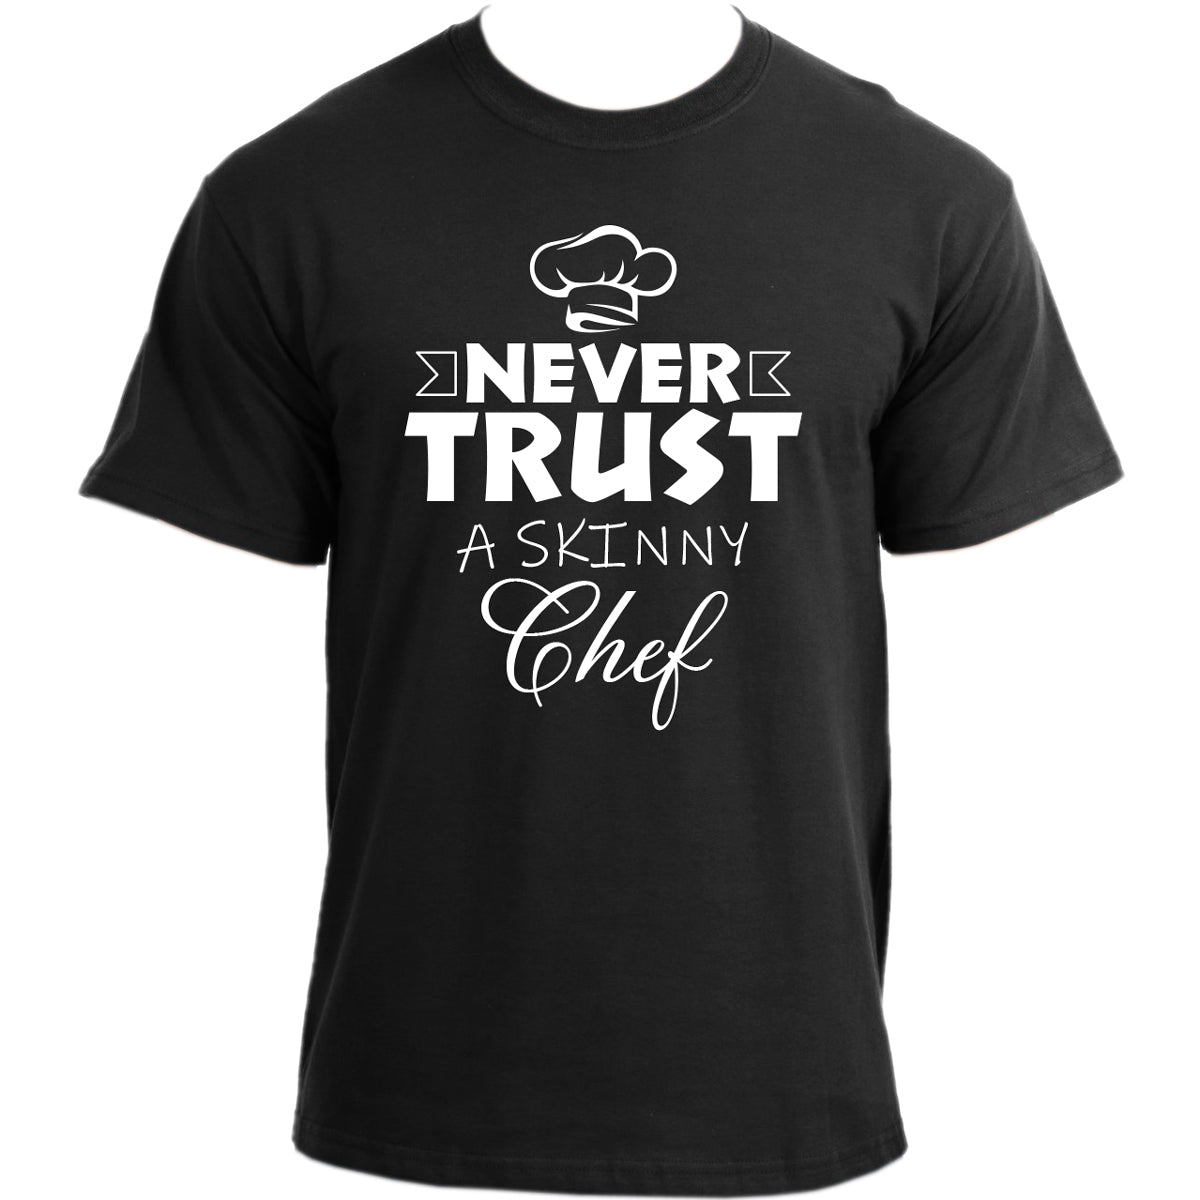 Never Trust a Skinny Chef Funny T-Shirt for Men â€“ Novelty Funny Chef T Shirt